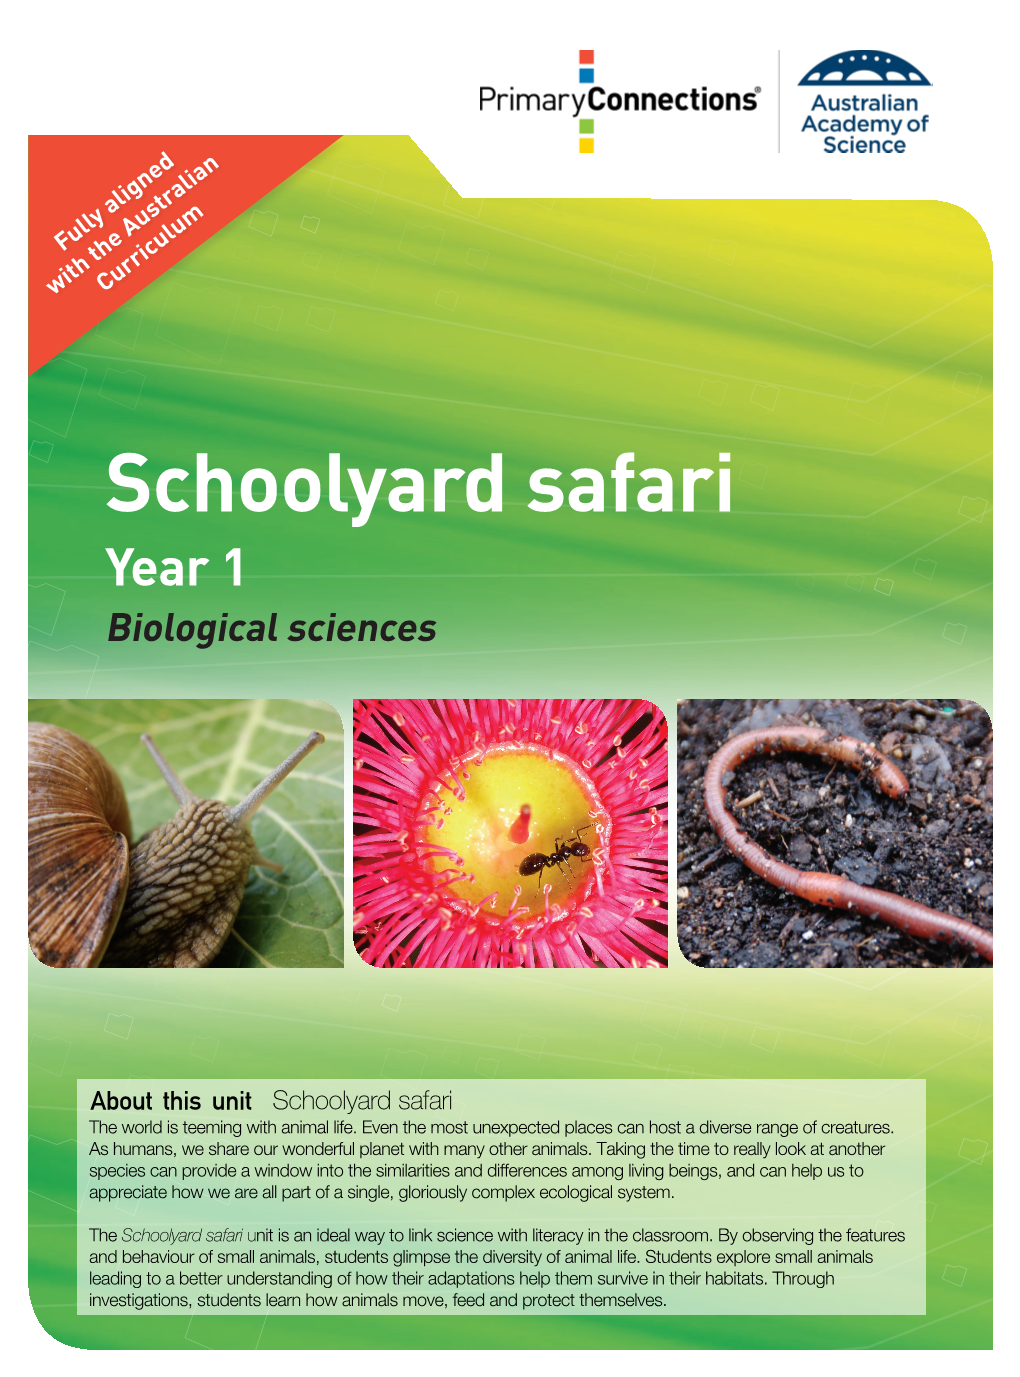 Schoolyard Safari Schoolyard Safari Based Approach, Embedded Assessment and Incorporates Indigenous Perspectives